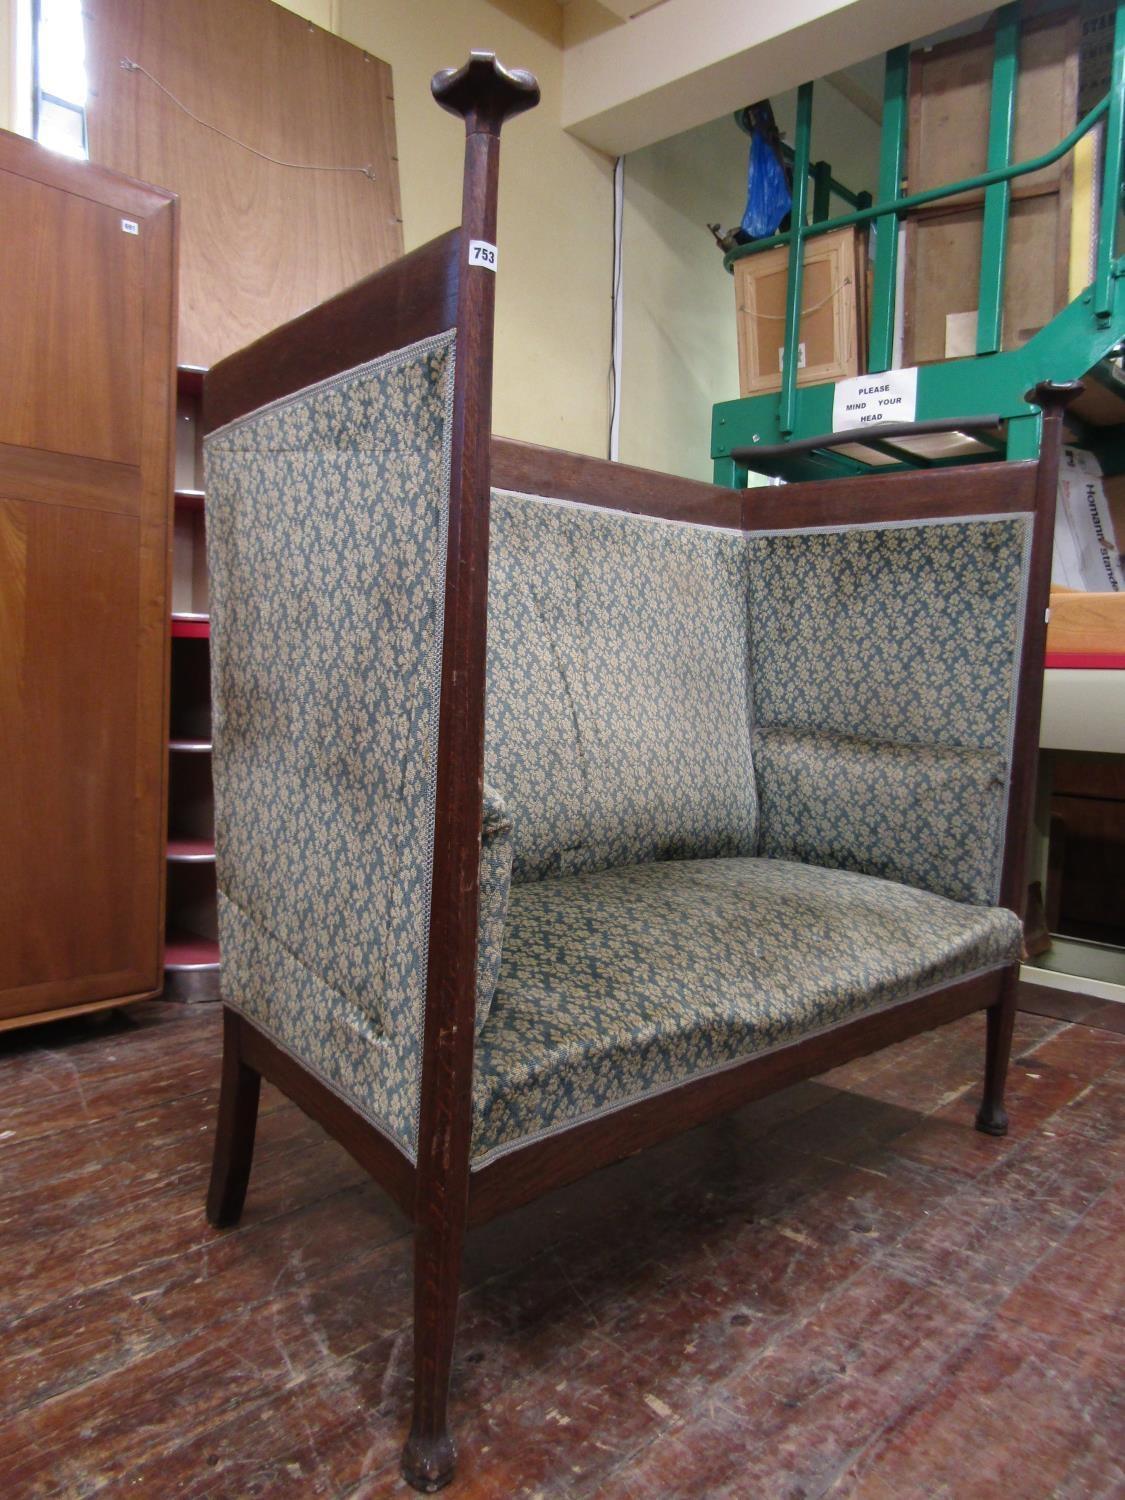 Walter Cave, made by R Nash.
A rare Arts and Crafts exhibition style oak settee or settle with Voysey style uprights to the front with carved flower head caps. 
A single armchair variation of this settle designed by Walter Cave and made by R Nash